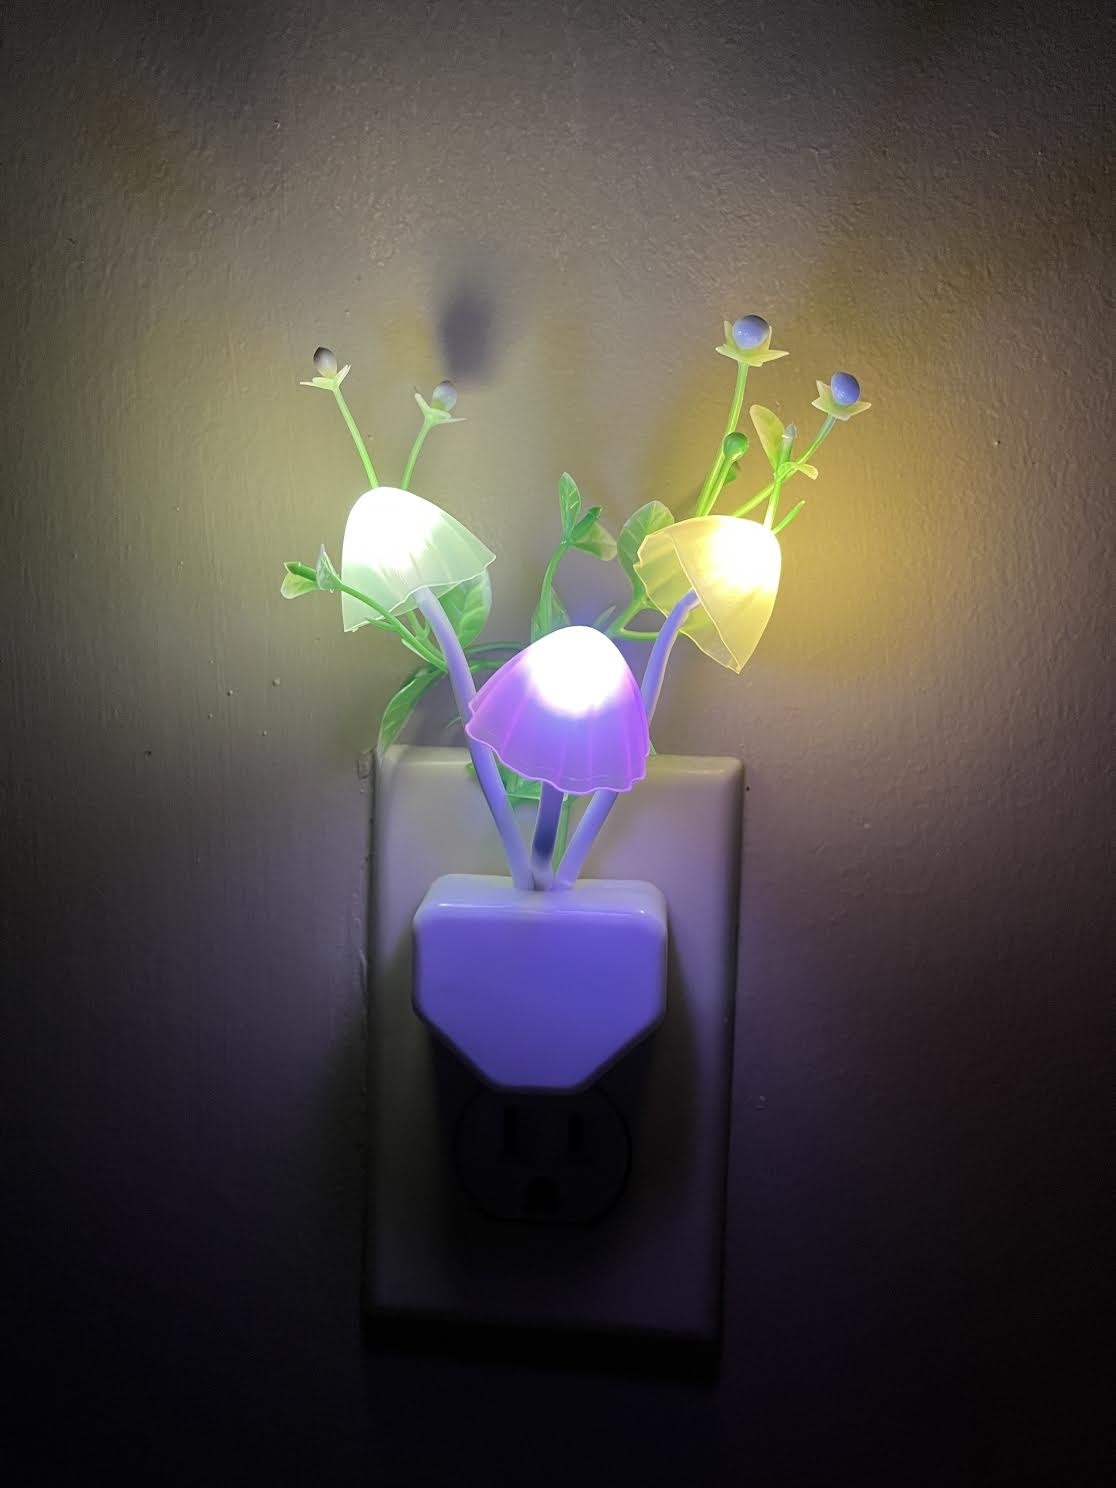 The night light plugged into a wall lit up three different colours